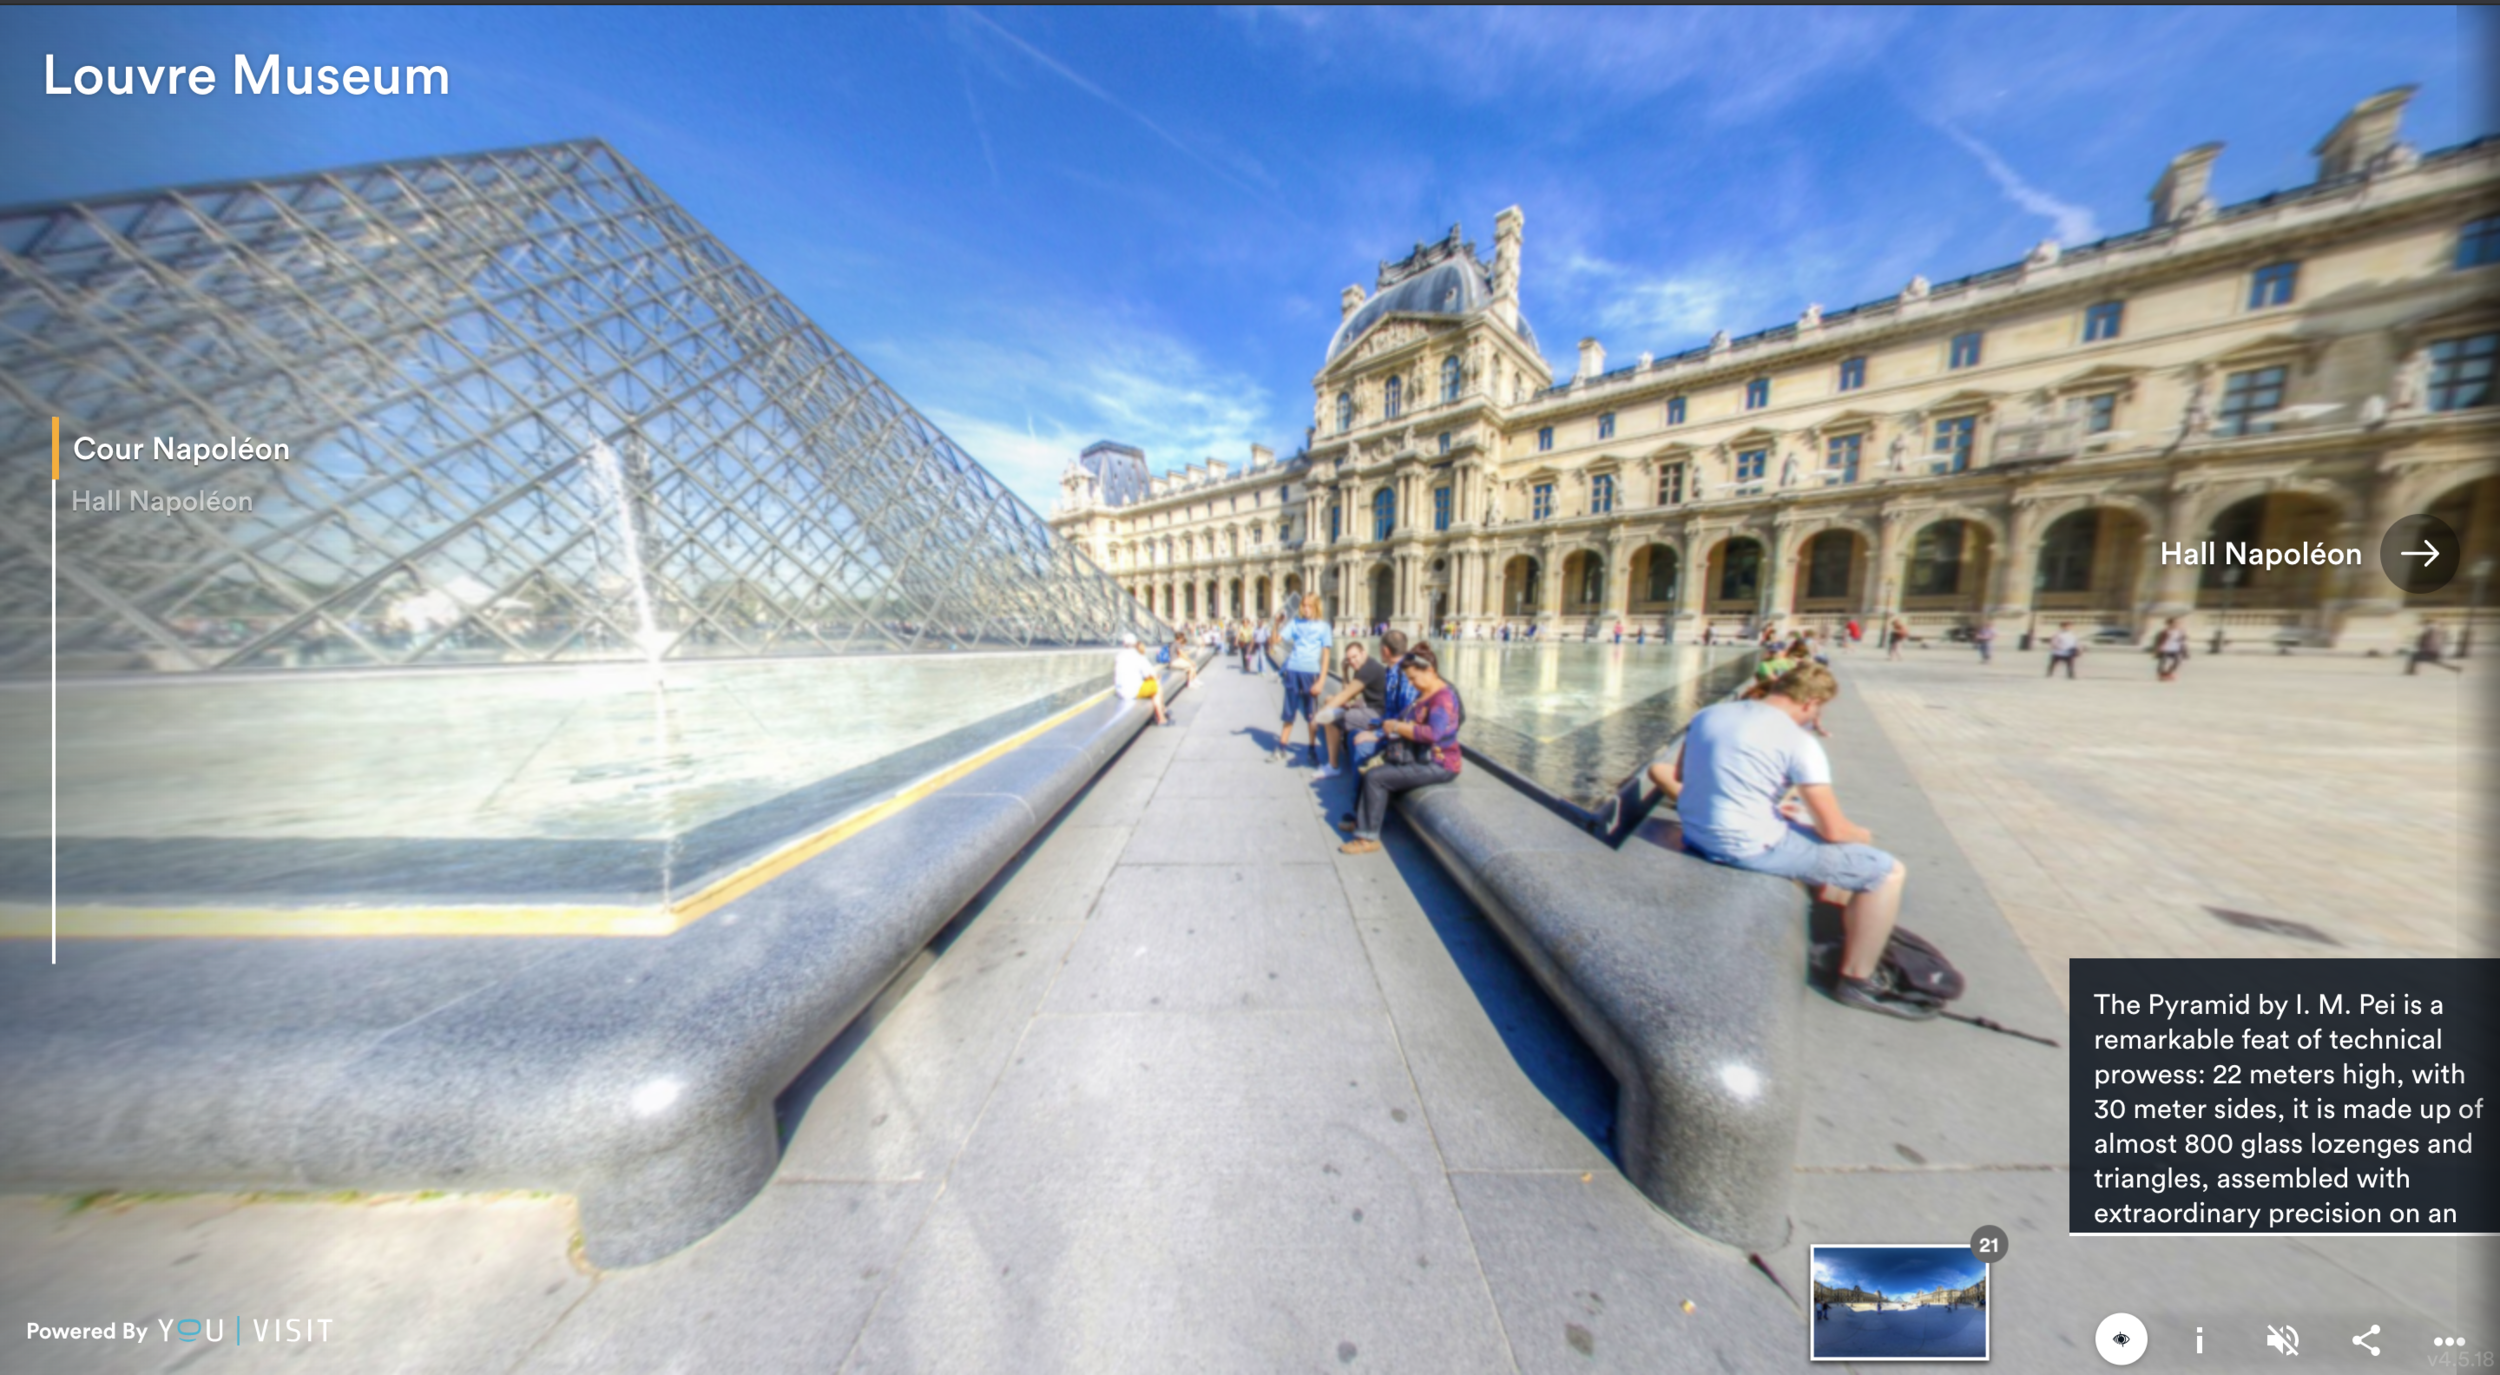 The Louvre VR experience